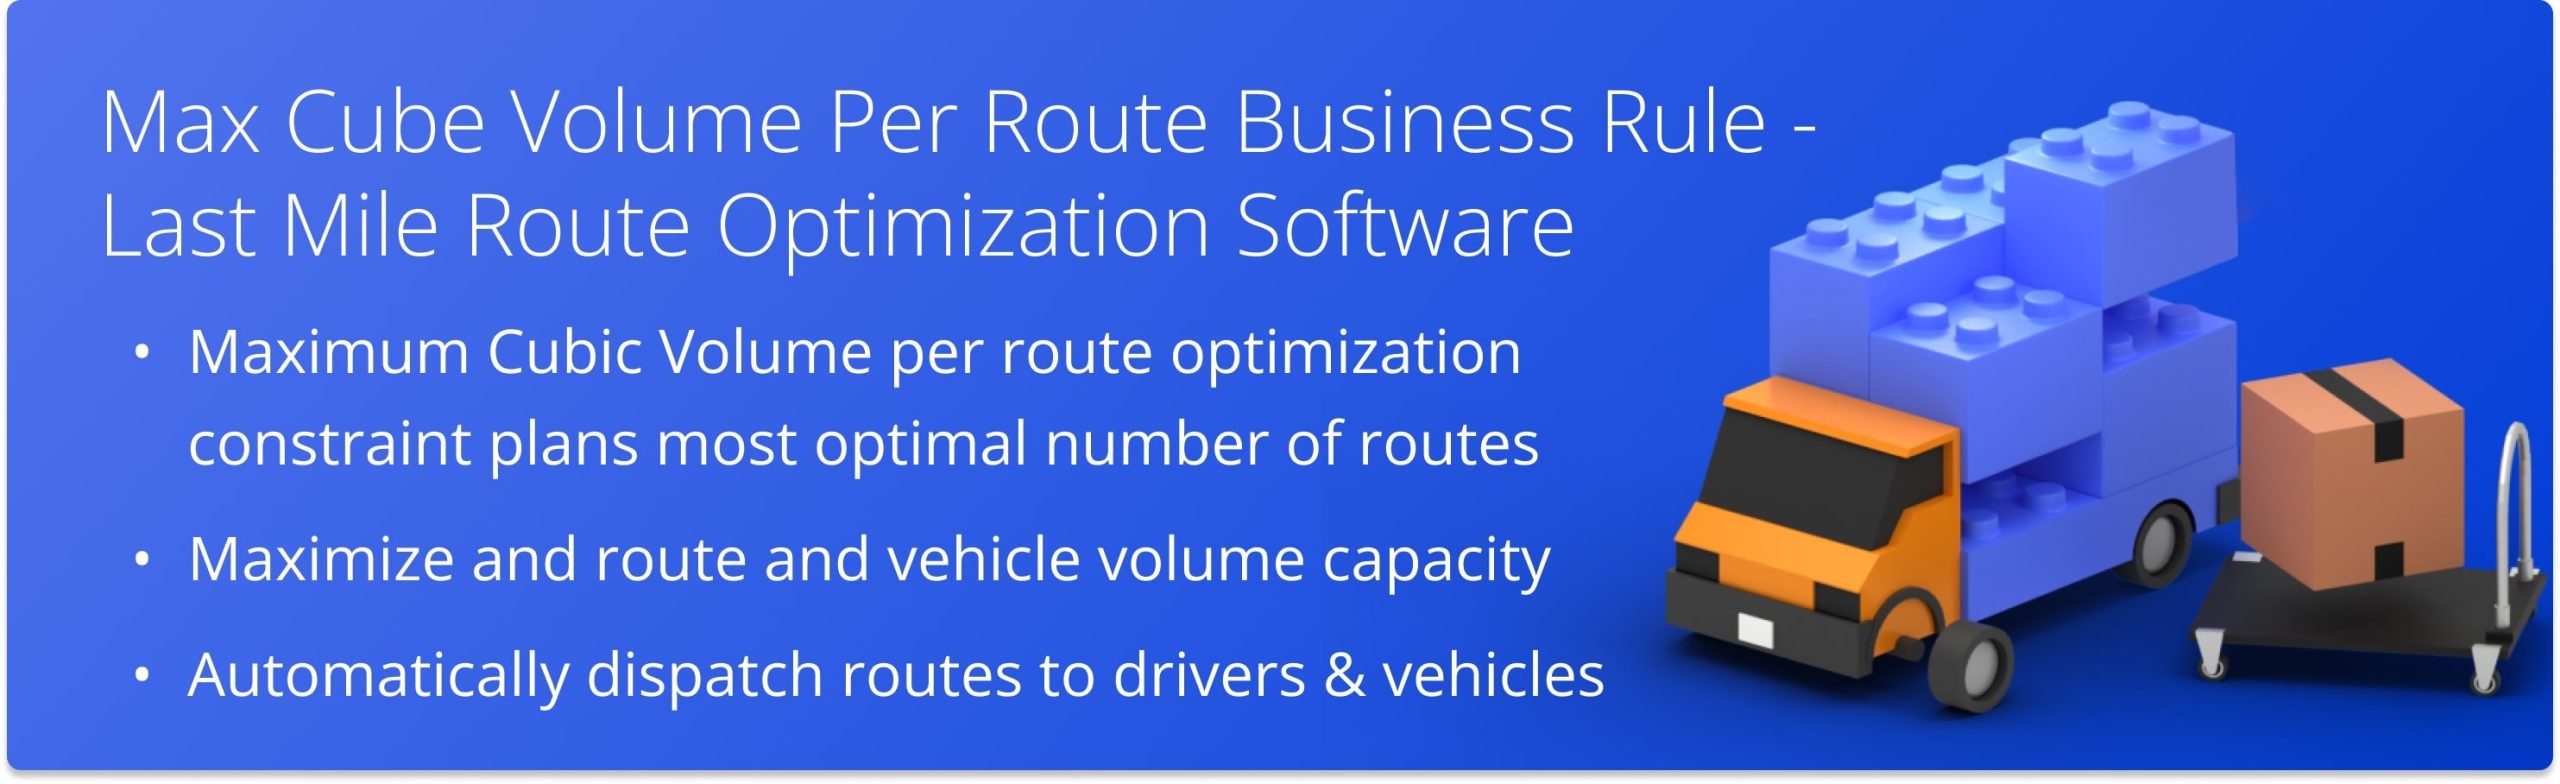 Plan multiple routes with limited max order volume from a single set of addresses automatically with Route4Me's Max Cube Business Rule.